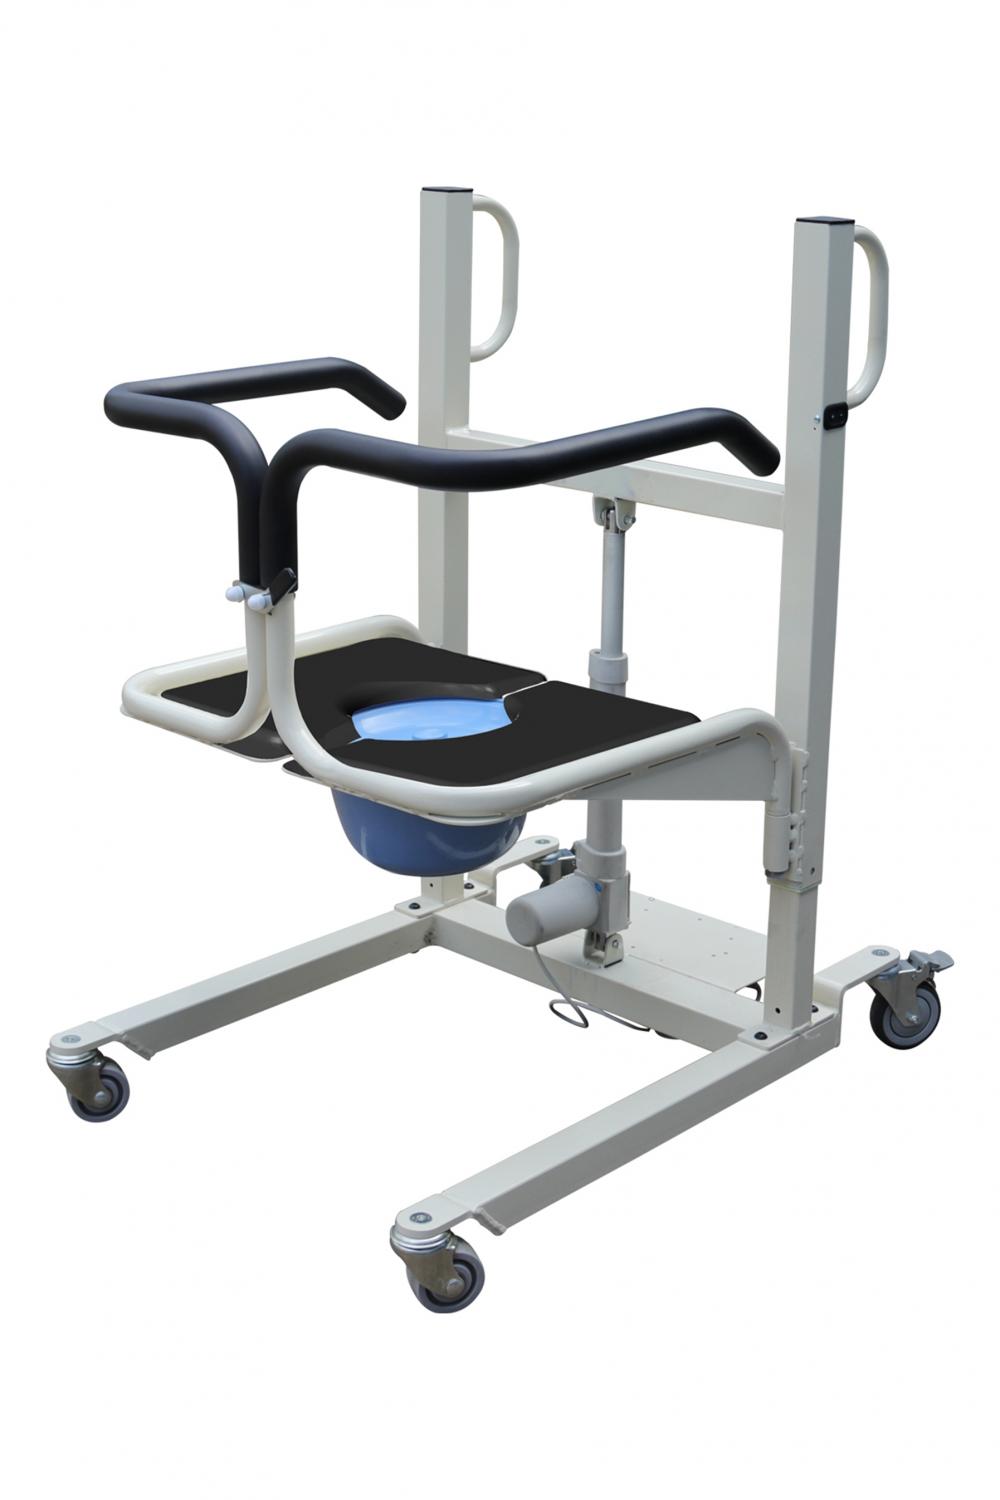 Best Patient Lift for Home Use